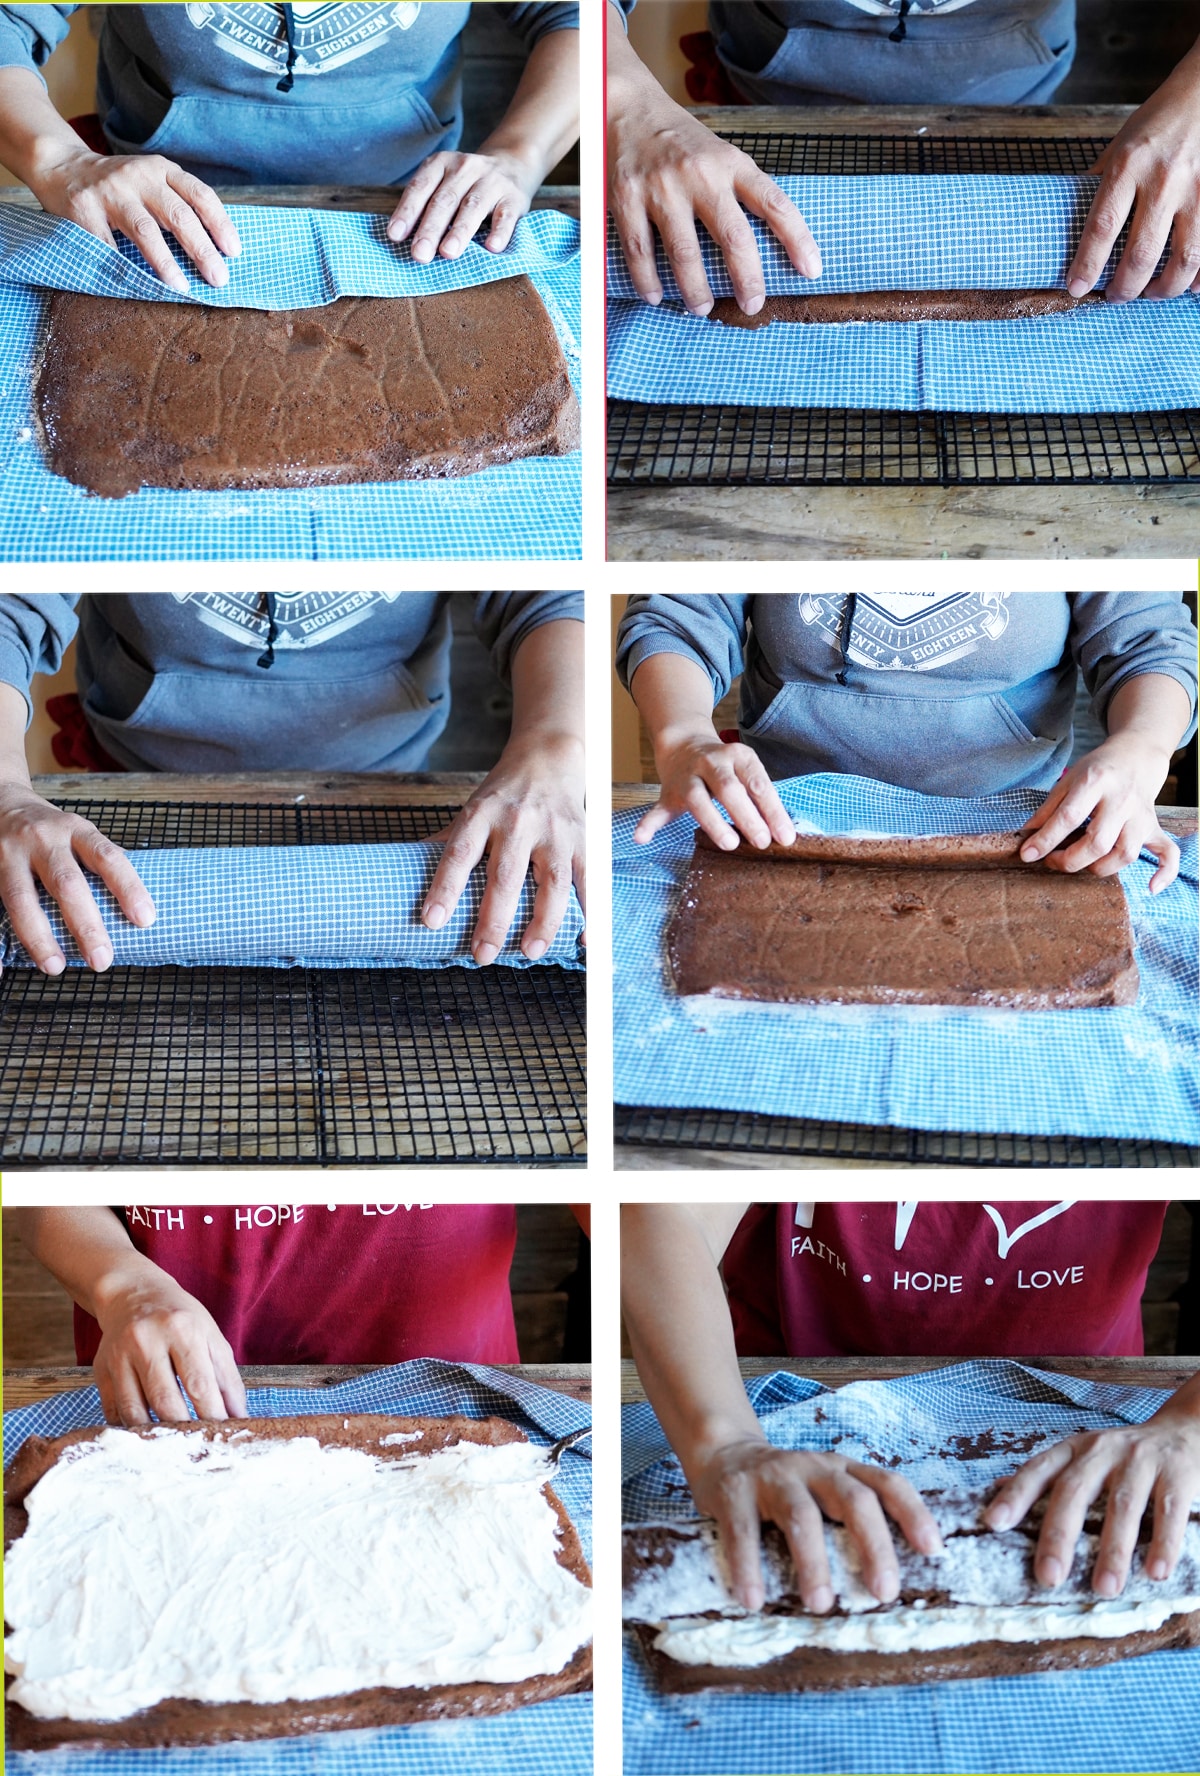 How to Roll Log Cake